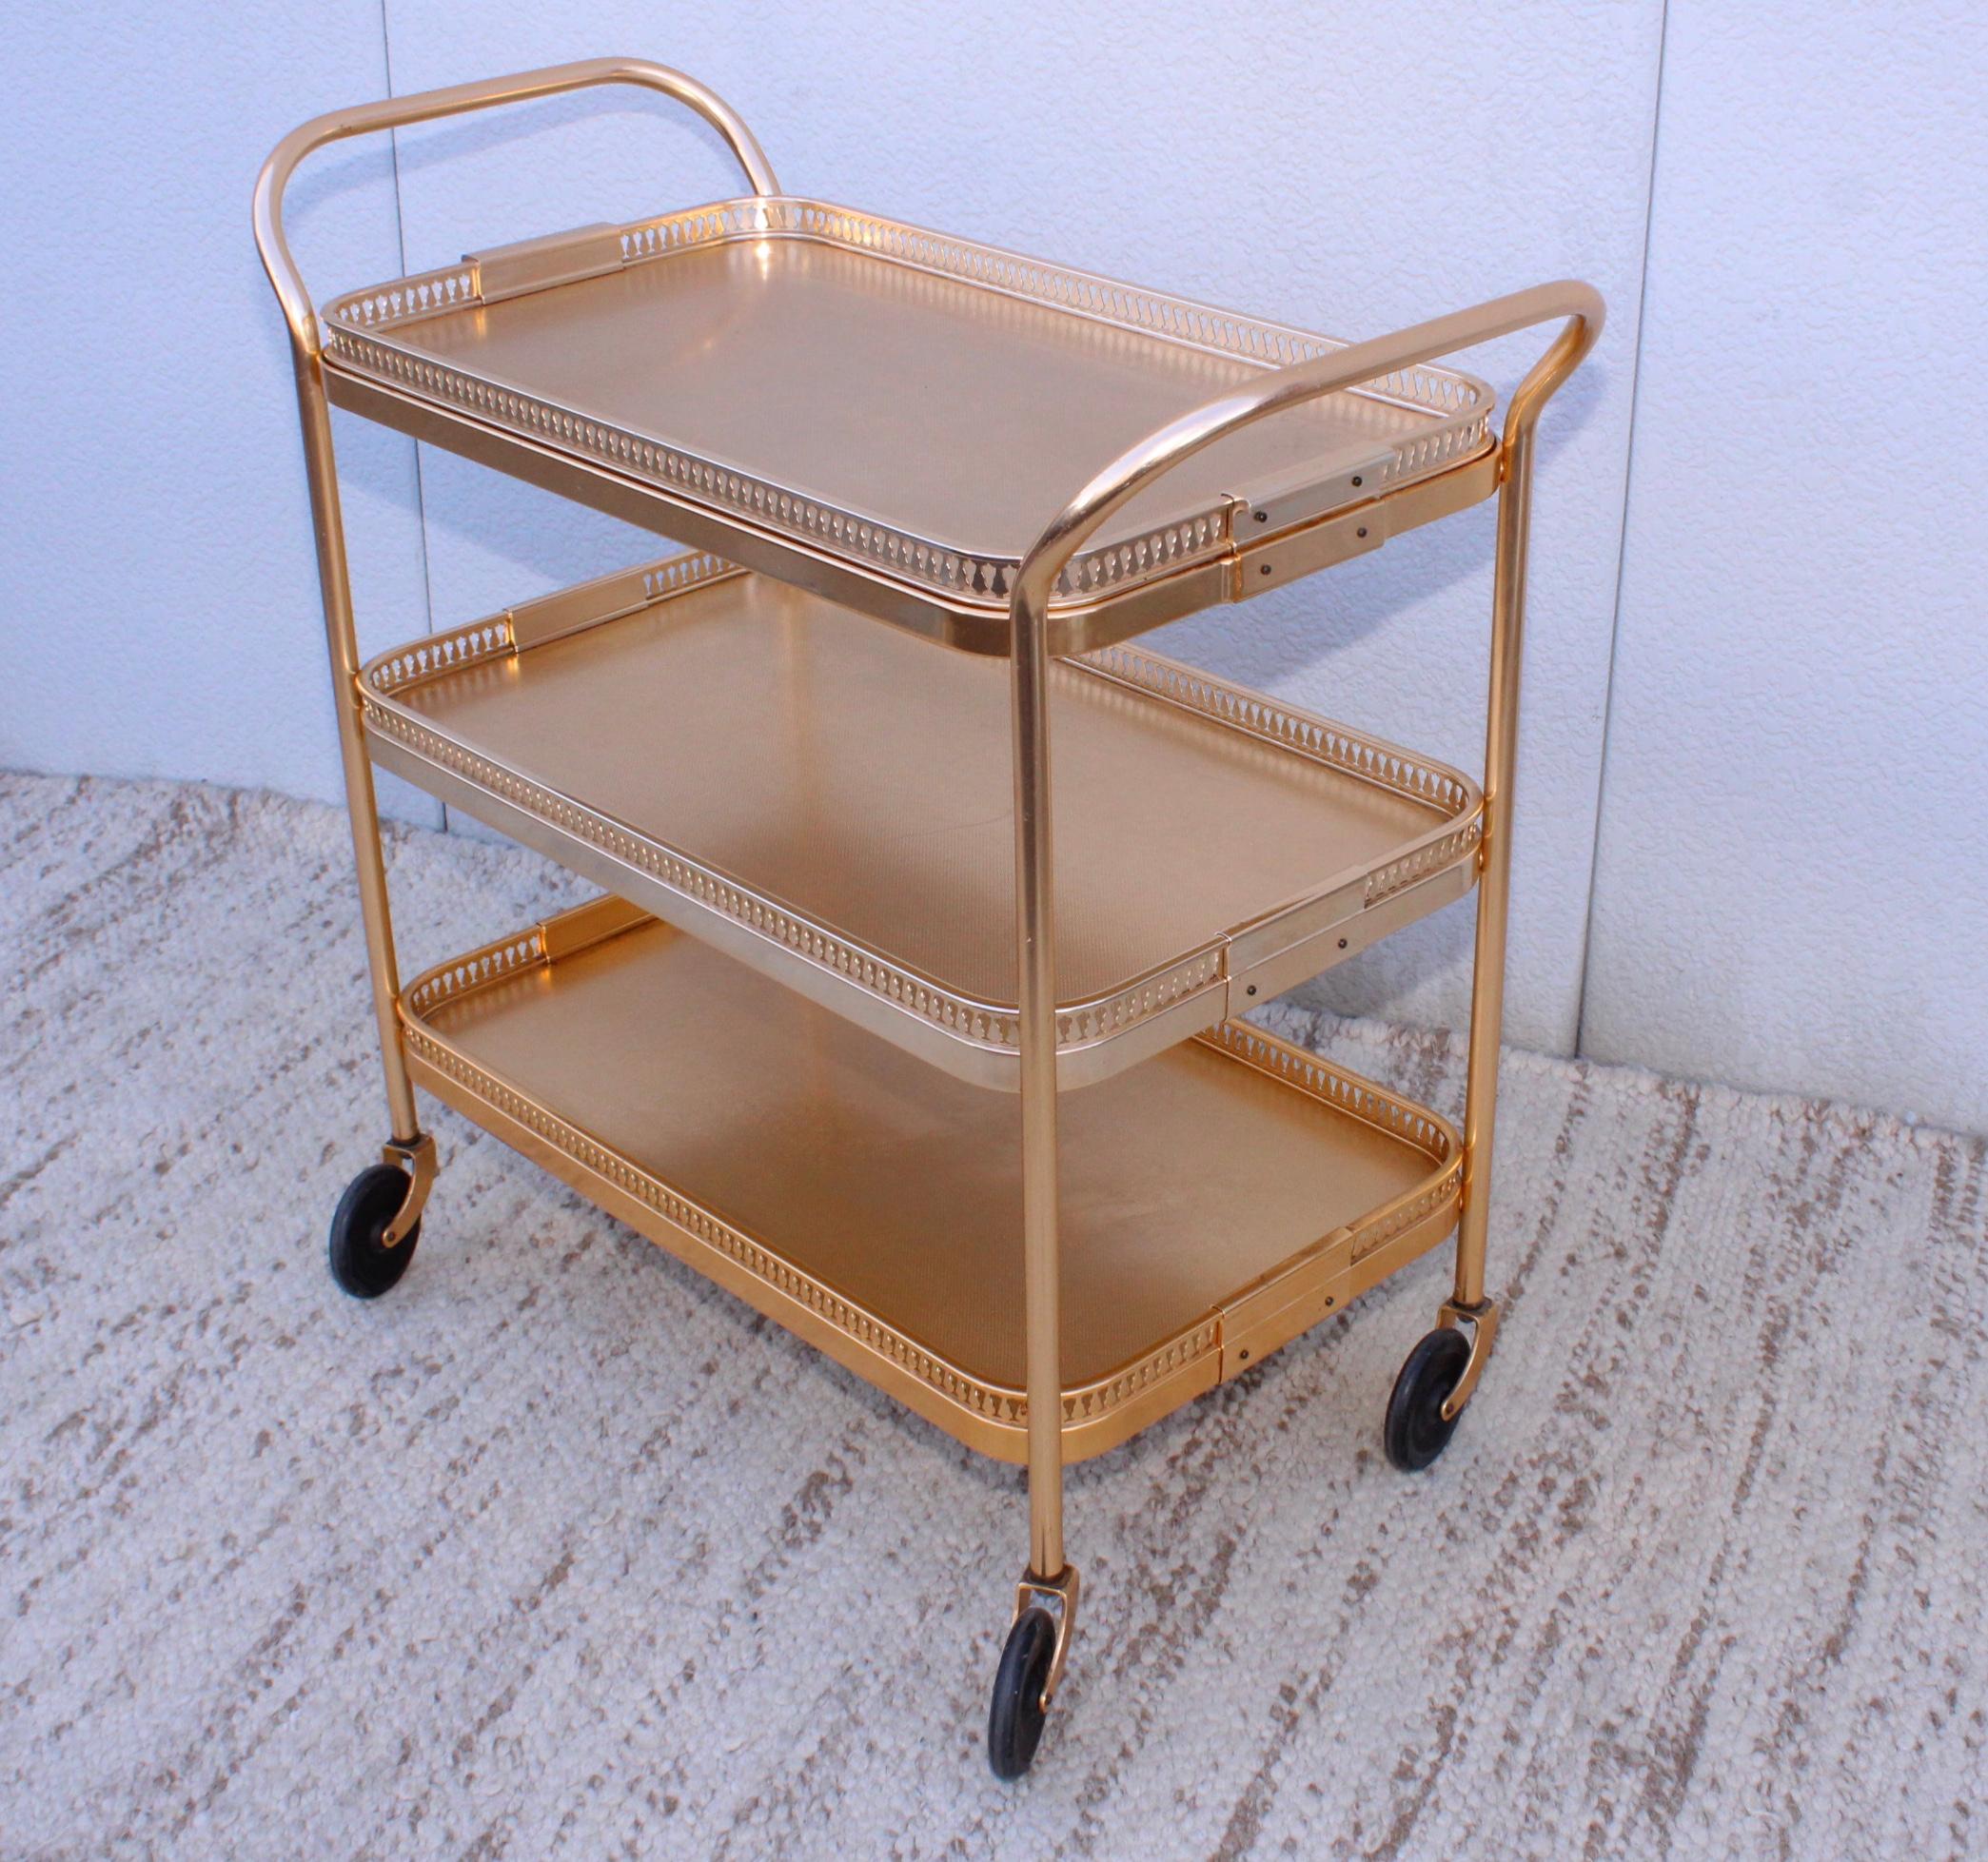 Mid-20th Century 1960's Mid-Century Modern 3 Tier Bar Cart from England by Kaymet